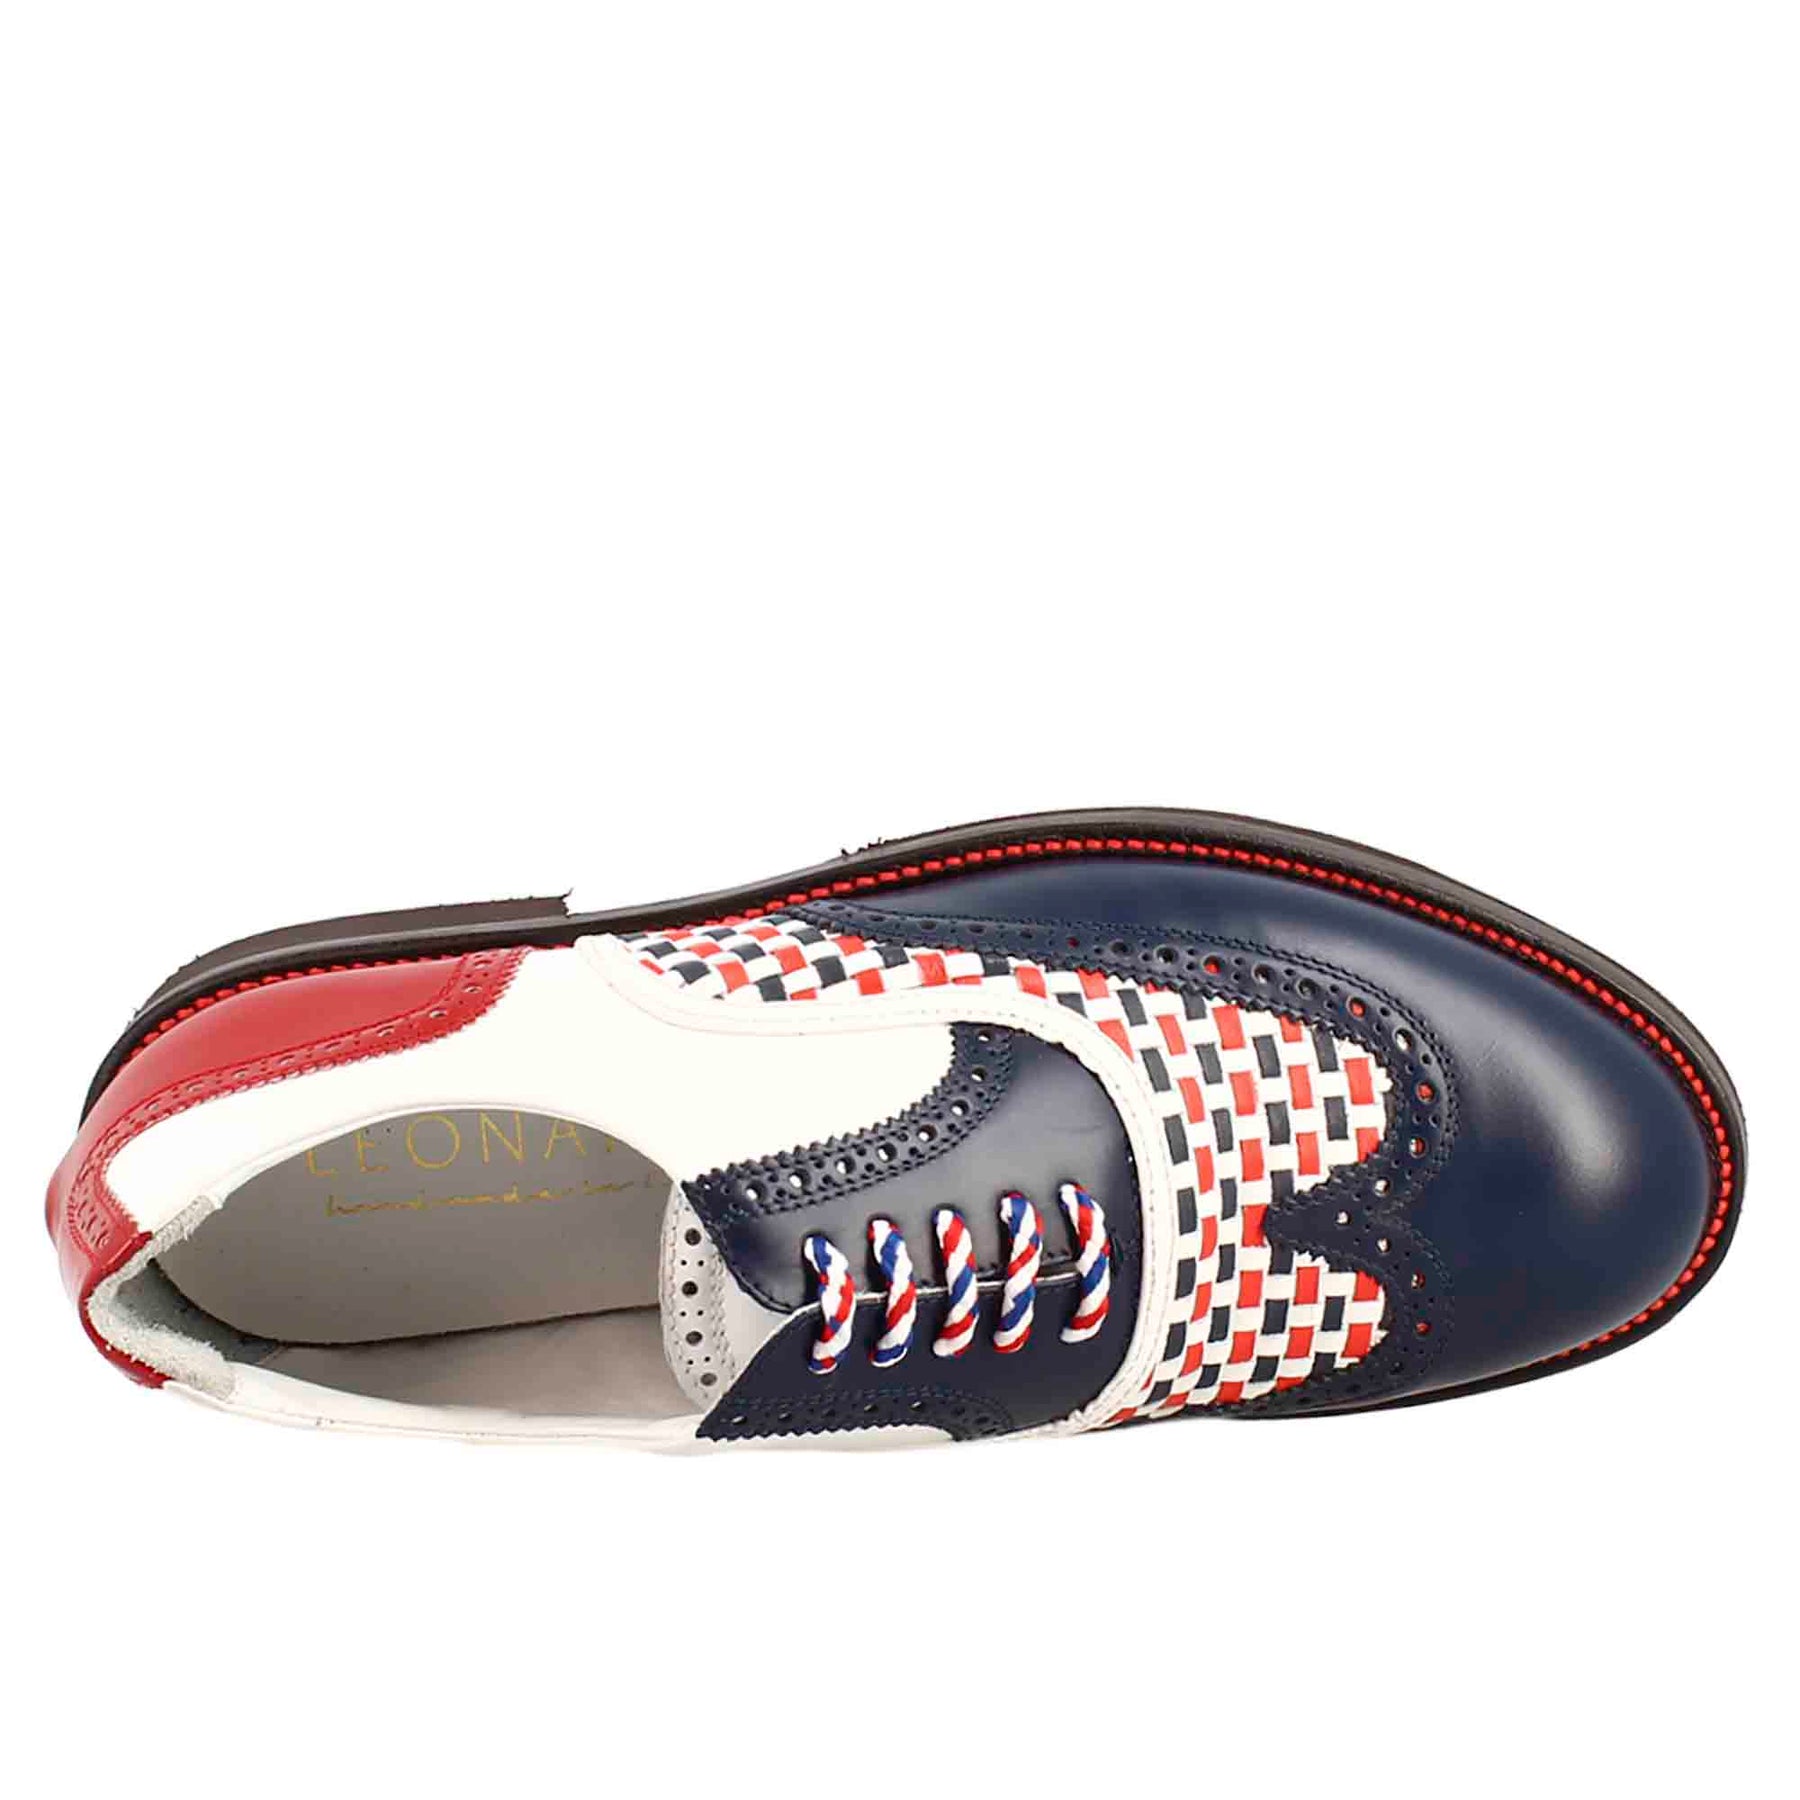 Men's blue and red leather handcrafted brogue details